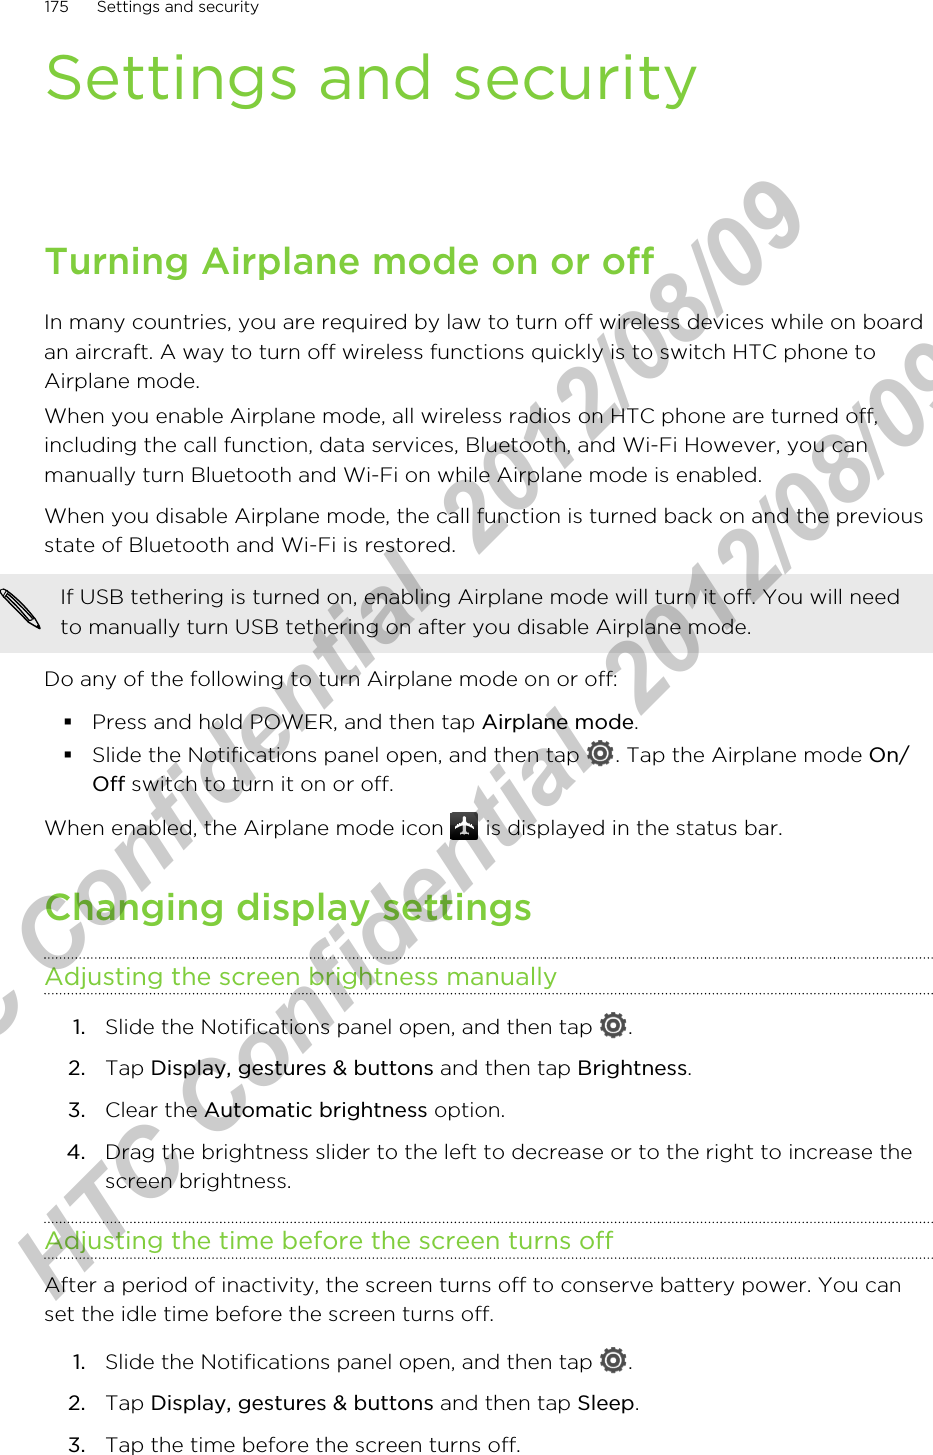 Settings and securityTurning Airplane mode on or offIn many countries, you are required by law to turn off wireless devices while on boardan aircraft. A way to turn off wireless functions quickly is to switch HTC phone toAirplane mode.When you enable Airplane mode, all wireless radios on HTC phone are turned off,including the call function, data services, Bluetooth, and Wi-Fi However, you canmanually turn Bluetooth and Wi-Fi on while Airplane mode is enabled.When you disable Airplane mode, the call function is turned back on and the previousstate of Bluetooth and Wi-Fi is restored.If USB tethering is turned on, enabling Airplane mode will turn it off. You will needto manually turn USB tethering on after you disable Airplane mode.Do any of the following to turn Airplane mode on or off:§Press and hold POWER, and then tap Airplane mode.§Slide the Notifications panel open, and then tap  . Tap the Airplane mode On/Off switch to turn it on or off.When enabled, the Airplane mode icon   is displayed in the status bar.Changing display settingsAdjusting the screen brightness manually1. Slide the Notifications panel open, and then tap  .2. Tap Display, gestures &amp; buttons and then tap Brightness.3. Clear the Automatic brightness option.4. Drag the brightness slider to the left to decrease or to the right to increase thescreen brightness.Adjusting the time before the screen turns offAfter a period of inactivity, the screen turns off to conserve battery power. You canset the idle time before the screen turns off.1. Slide the Notifications panel open, and then tap  .2. Tap Display, gestures &amp; buttons and then tap Sleep.3. Tap the time before the screen turns off.175 Settings and securityHTC Confidential  2012/08/09  HTC Confidential  2012/08/09 